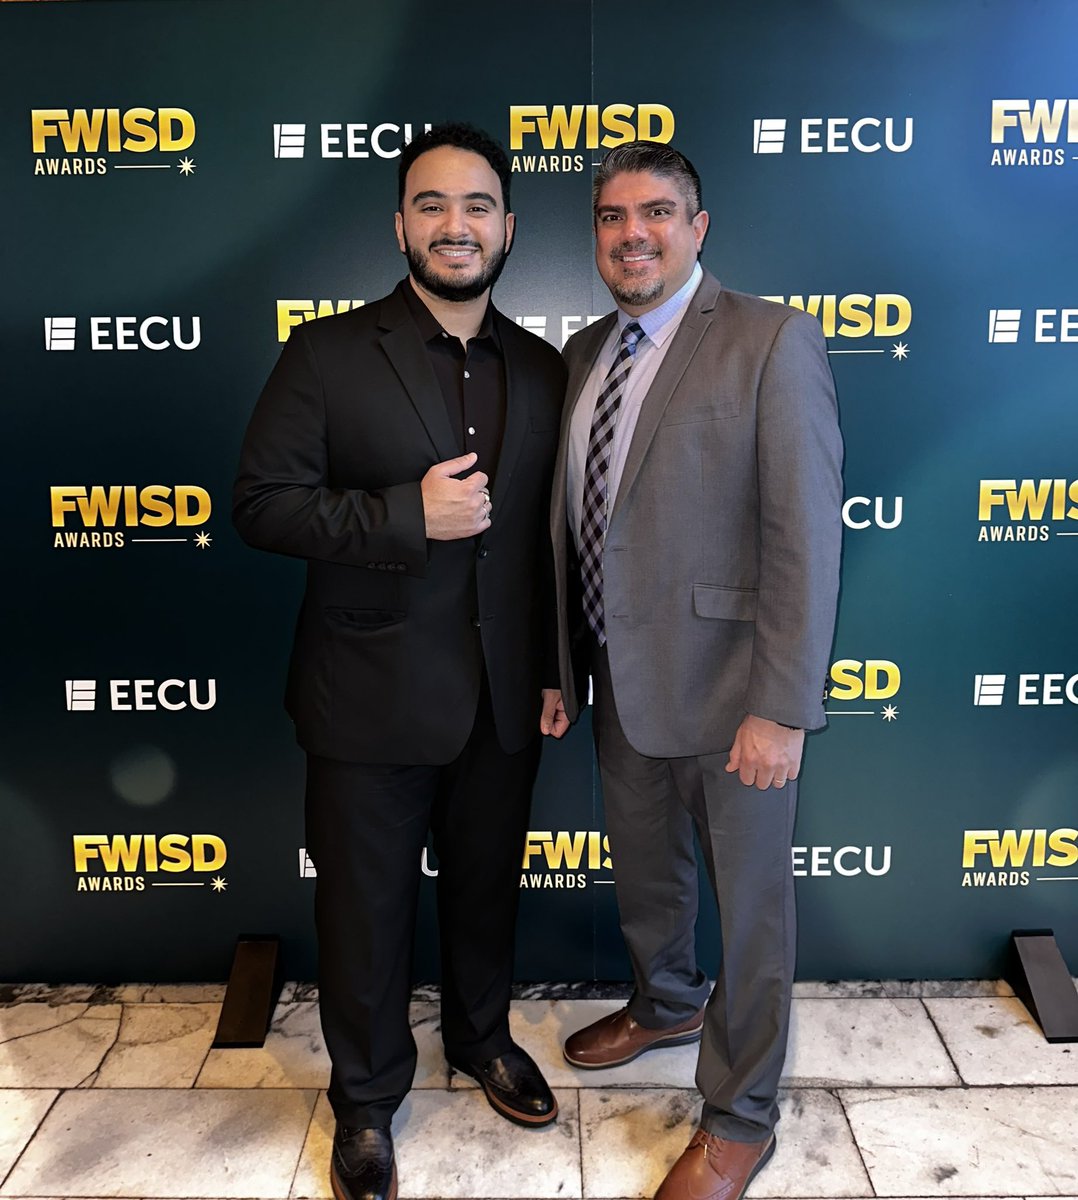 I am honored to lead a school with the @FortWorthISD Secondary Teacher of the Year. Elijah Ballesteros is an amazing teacher, but an even better person who truly cares for his students. #proudprincipal @ChrisjBarksdale @CharlieGarciaFW @amramsey13 @ODWyattFWISD